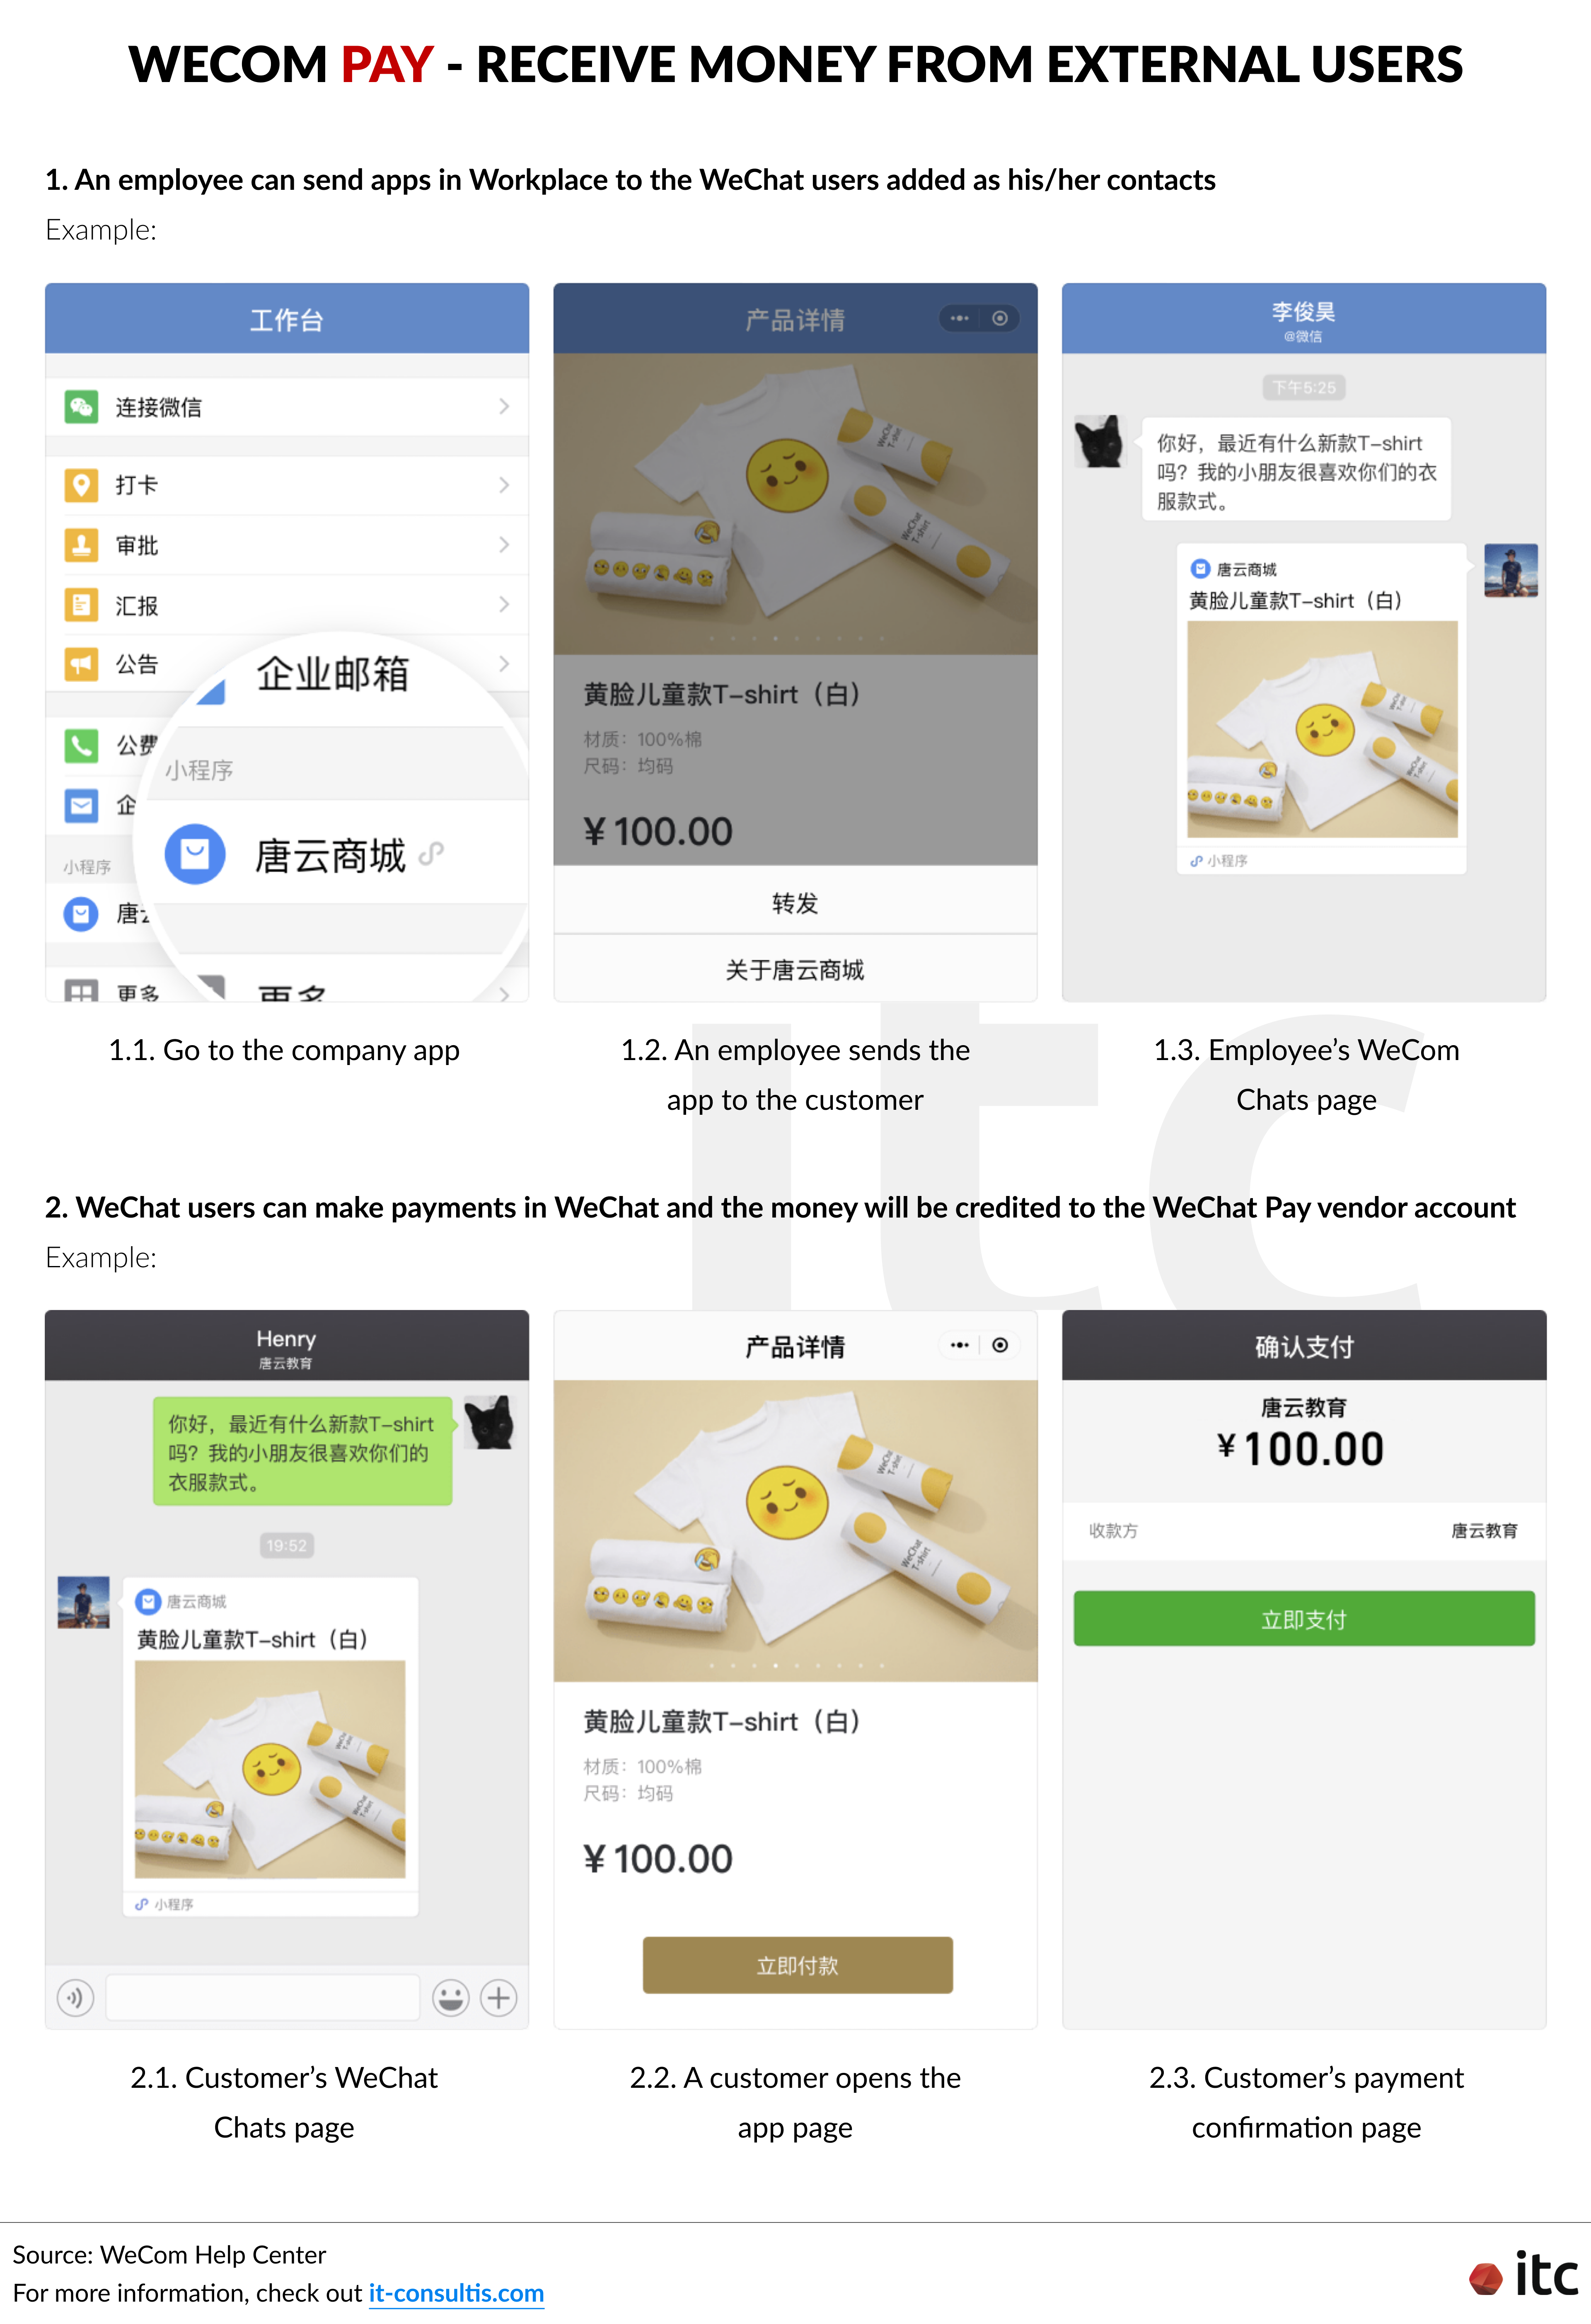 Sales Associates can activate WeCom Pay to receive money from external users (the customers) instead of leveraging their personal WeChat Pay